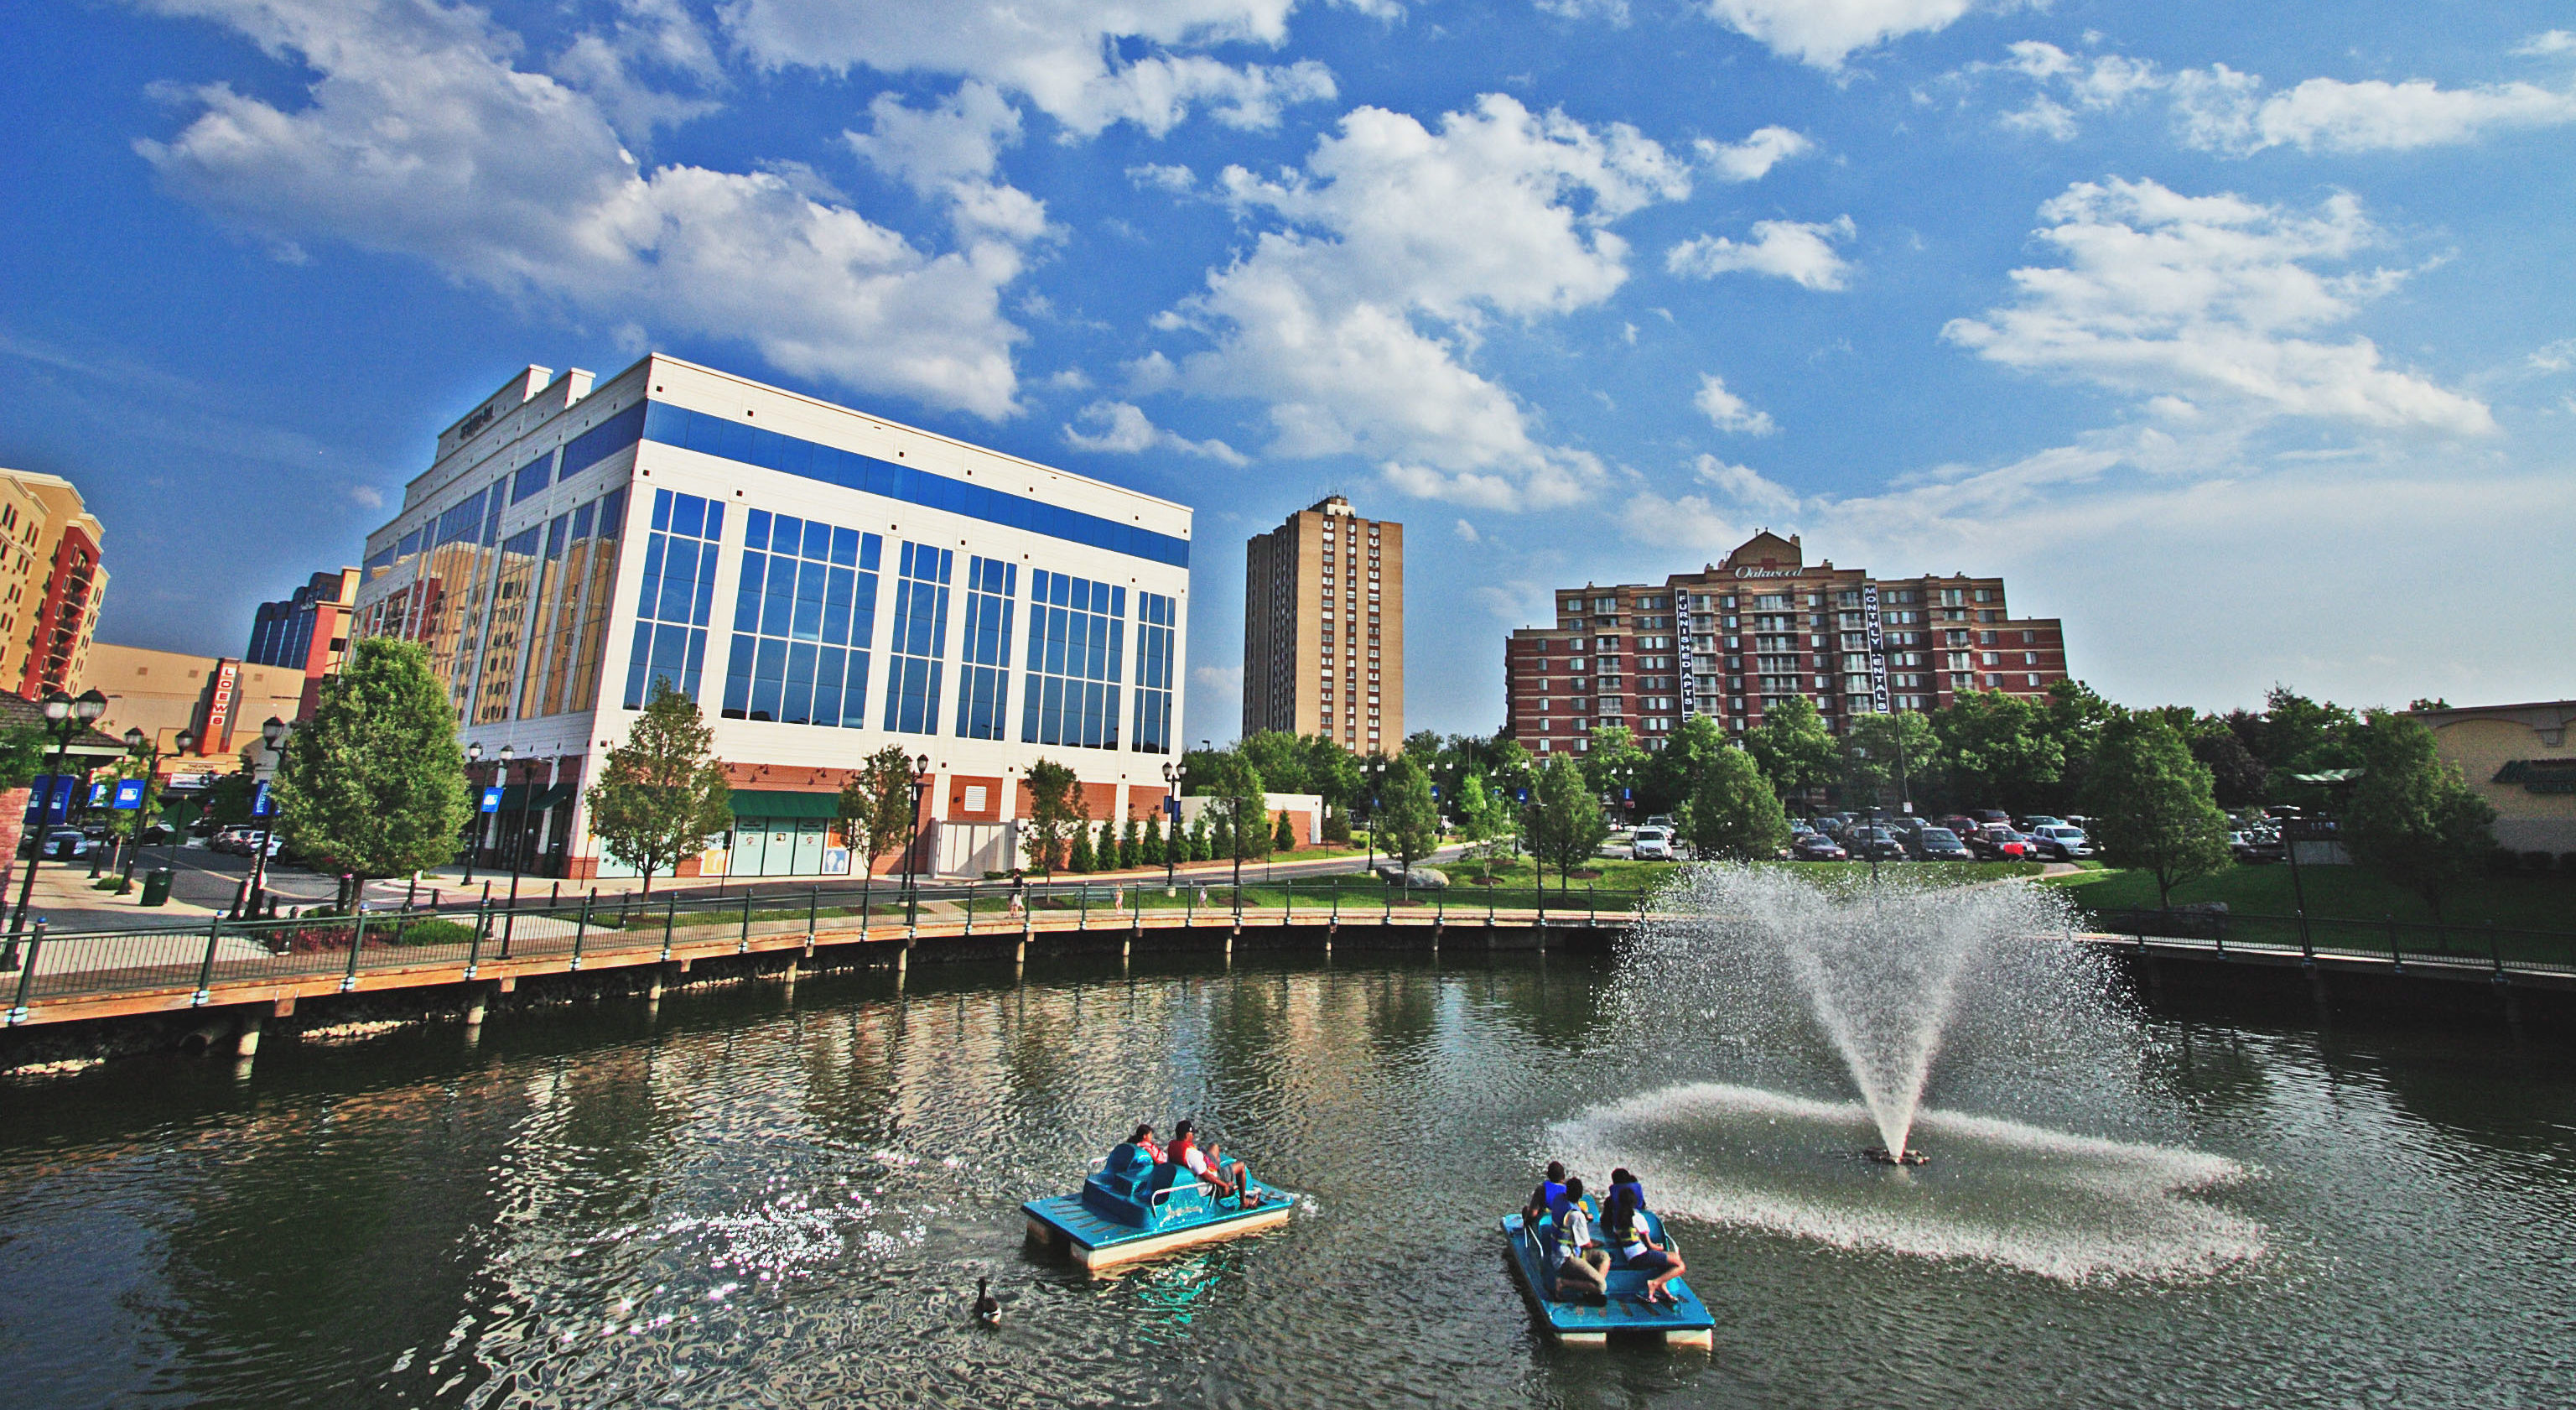 10 Reasons To Move To Bethesda, MD - Livability